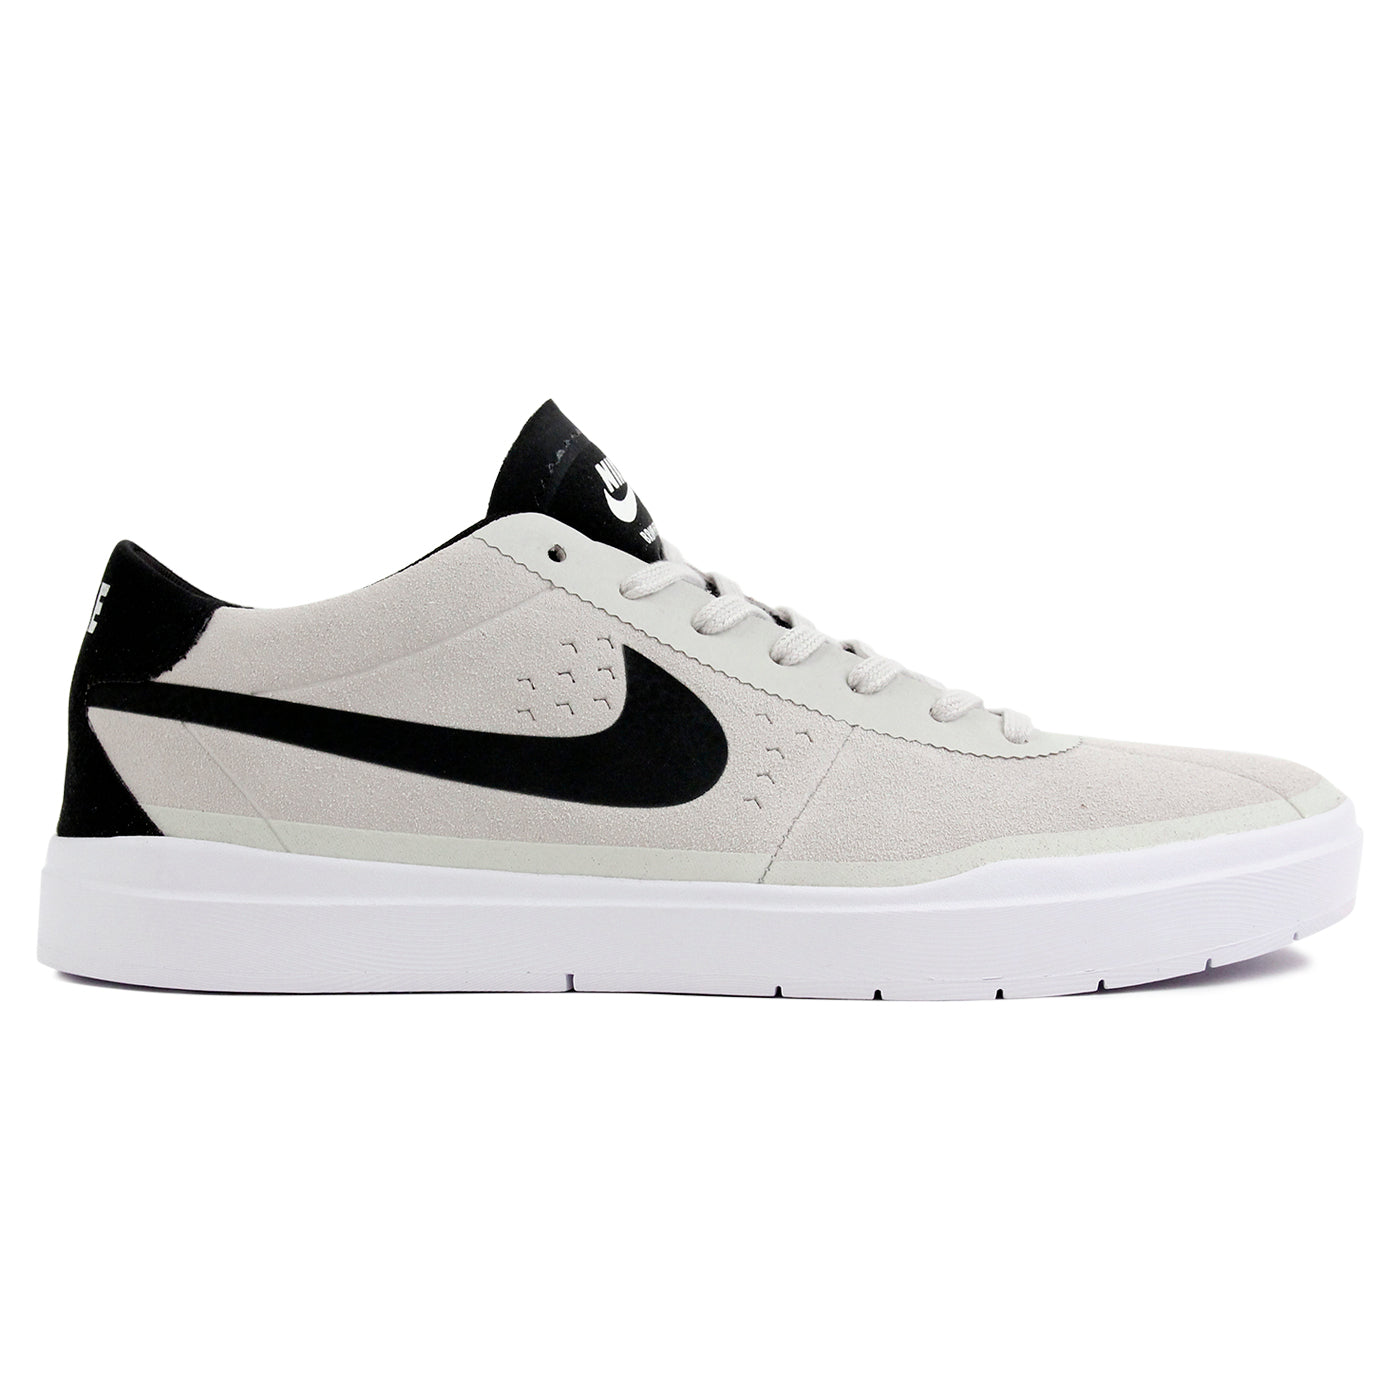 Bruin Hyperfeel Shoes in Summit Black - White by Nike SB | Bored of Southsea